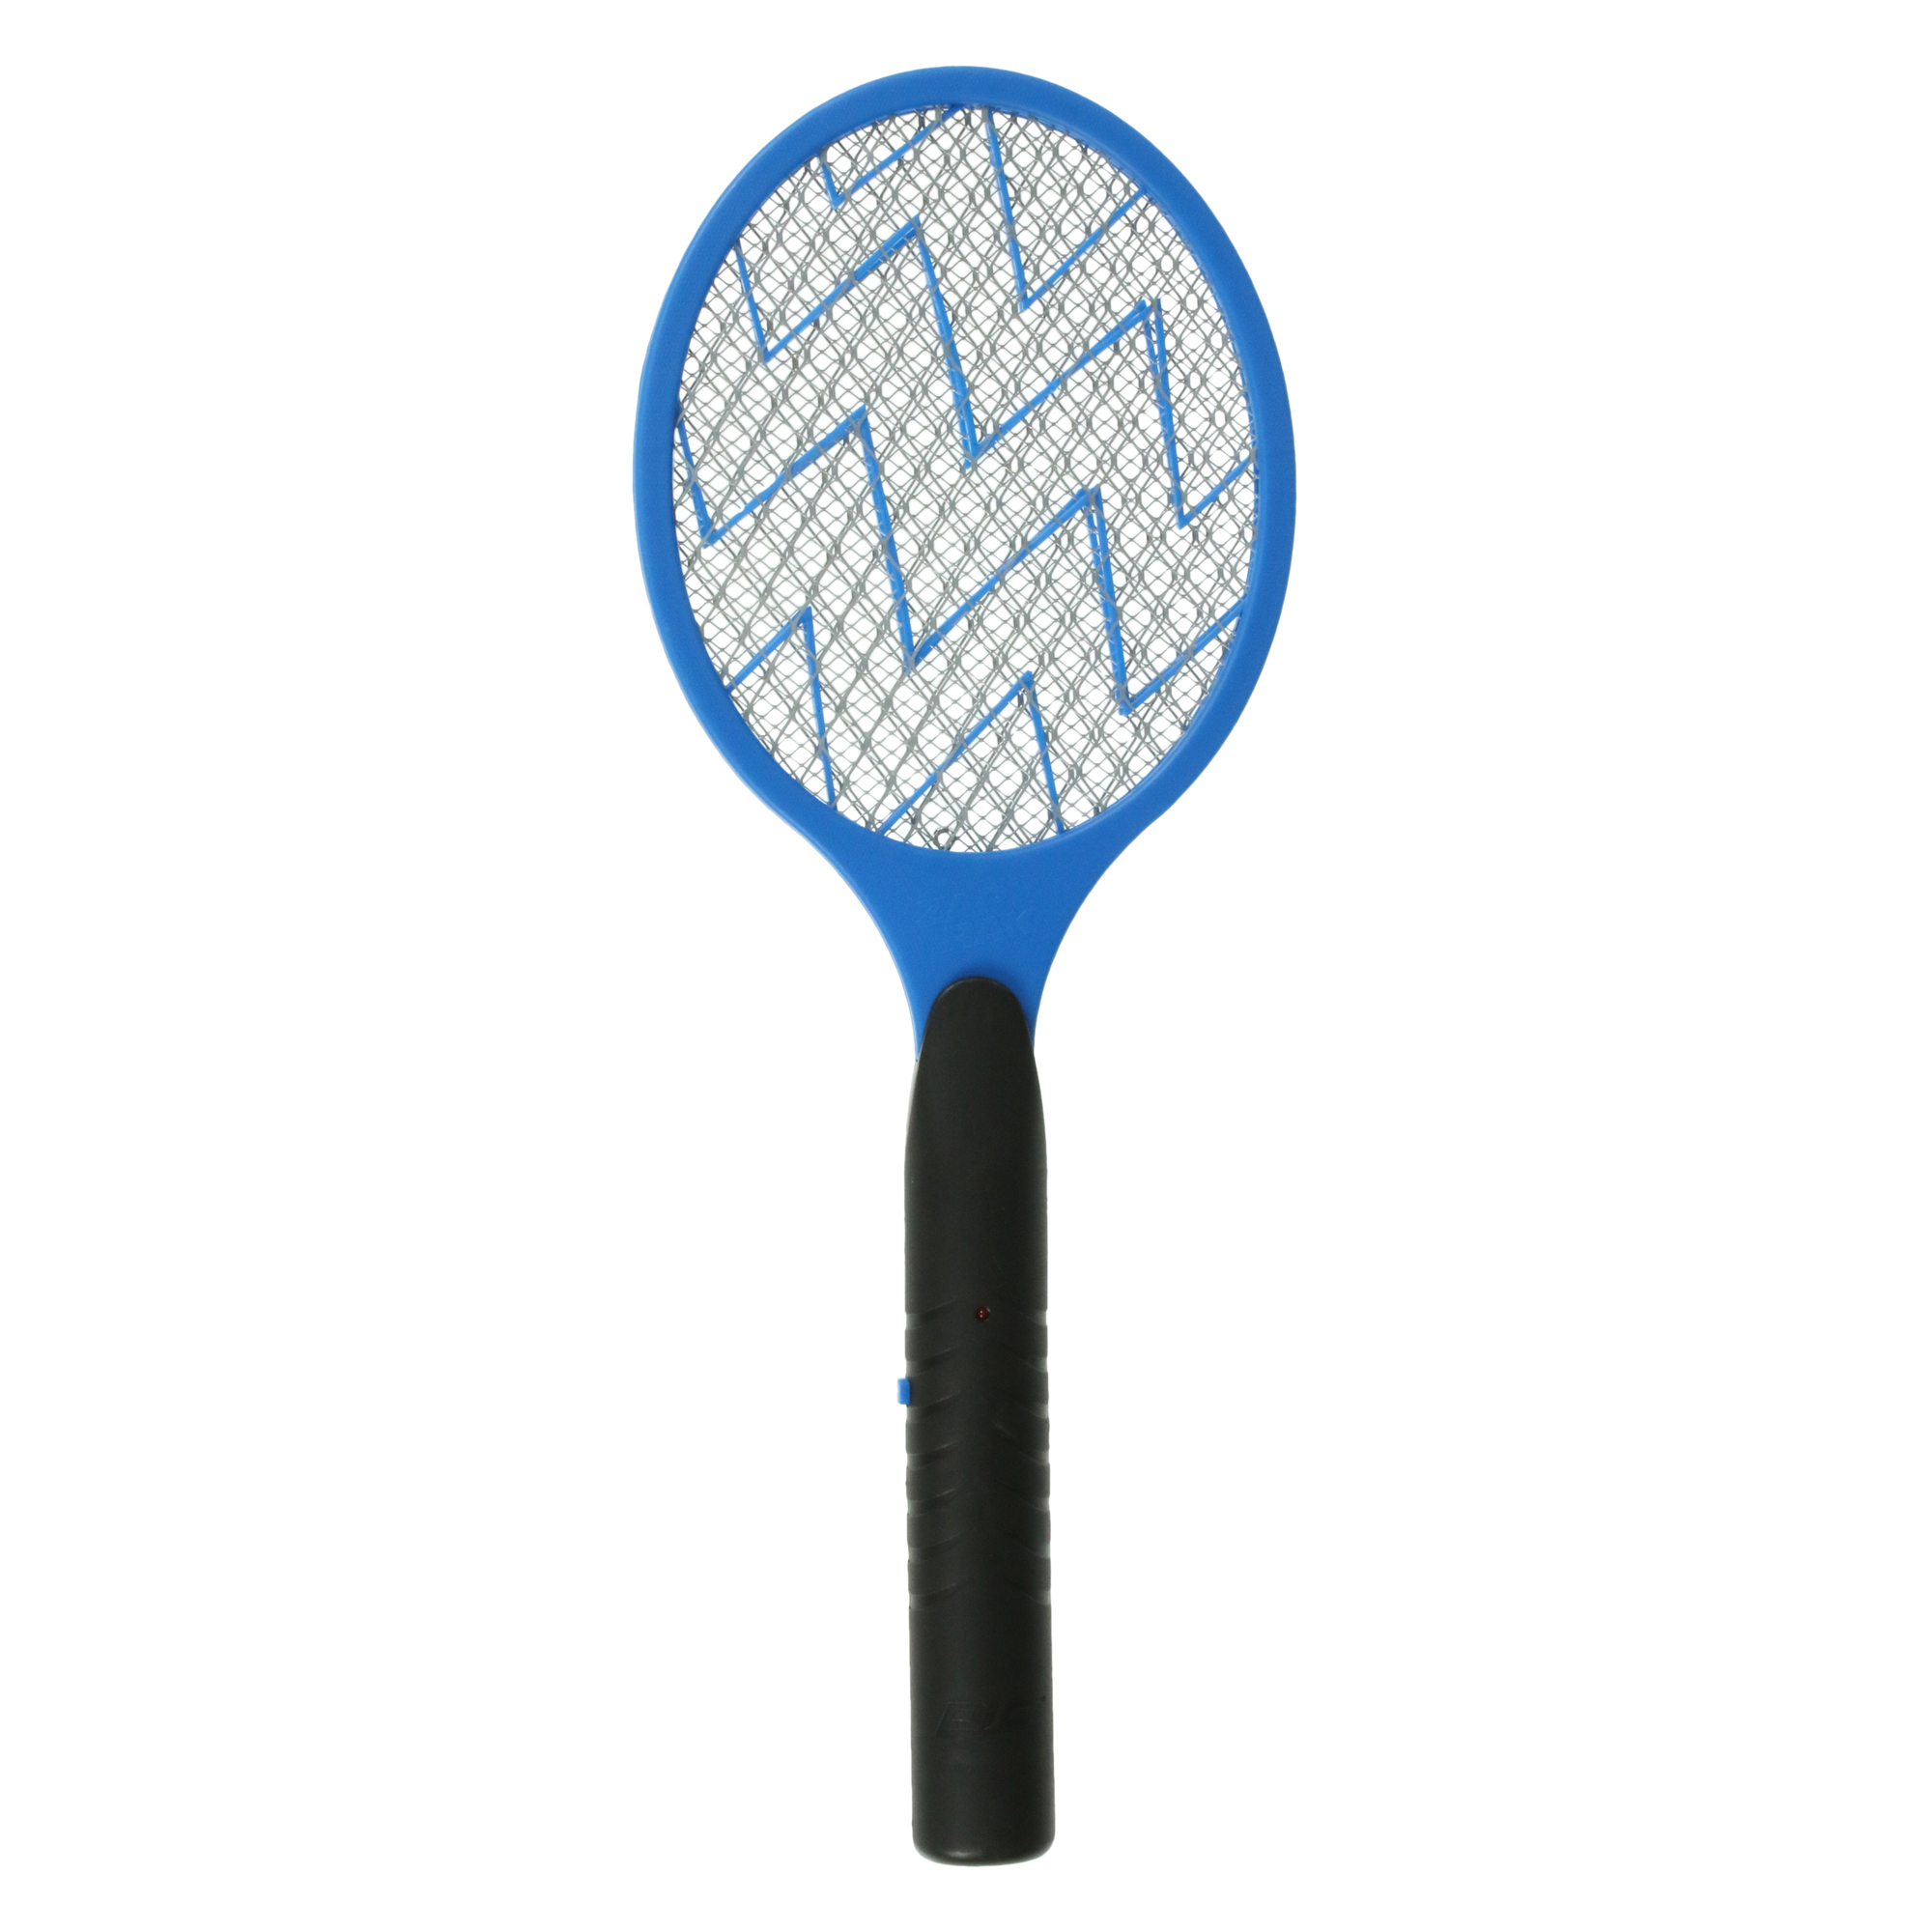 mosquito & flying insect bug zapper racket